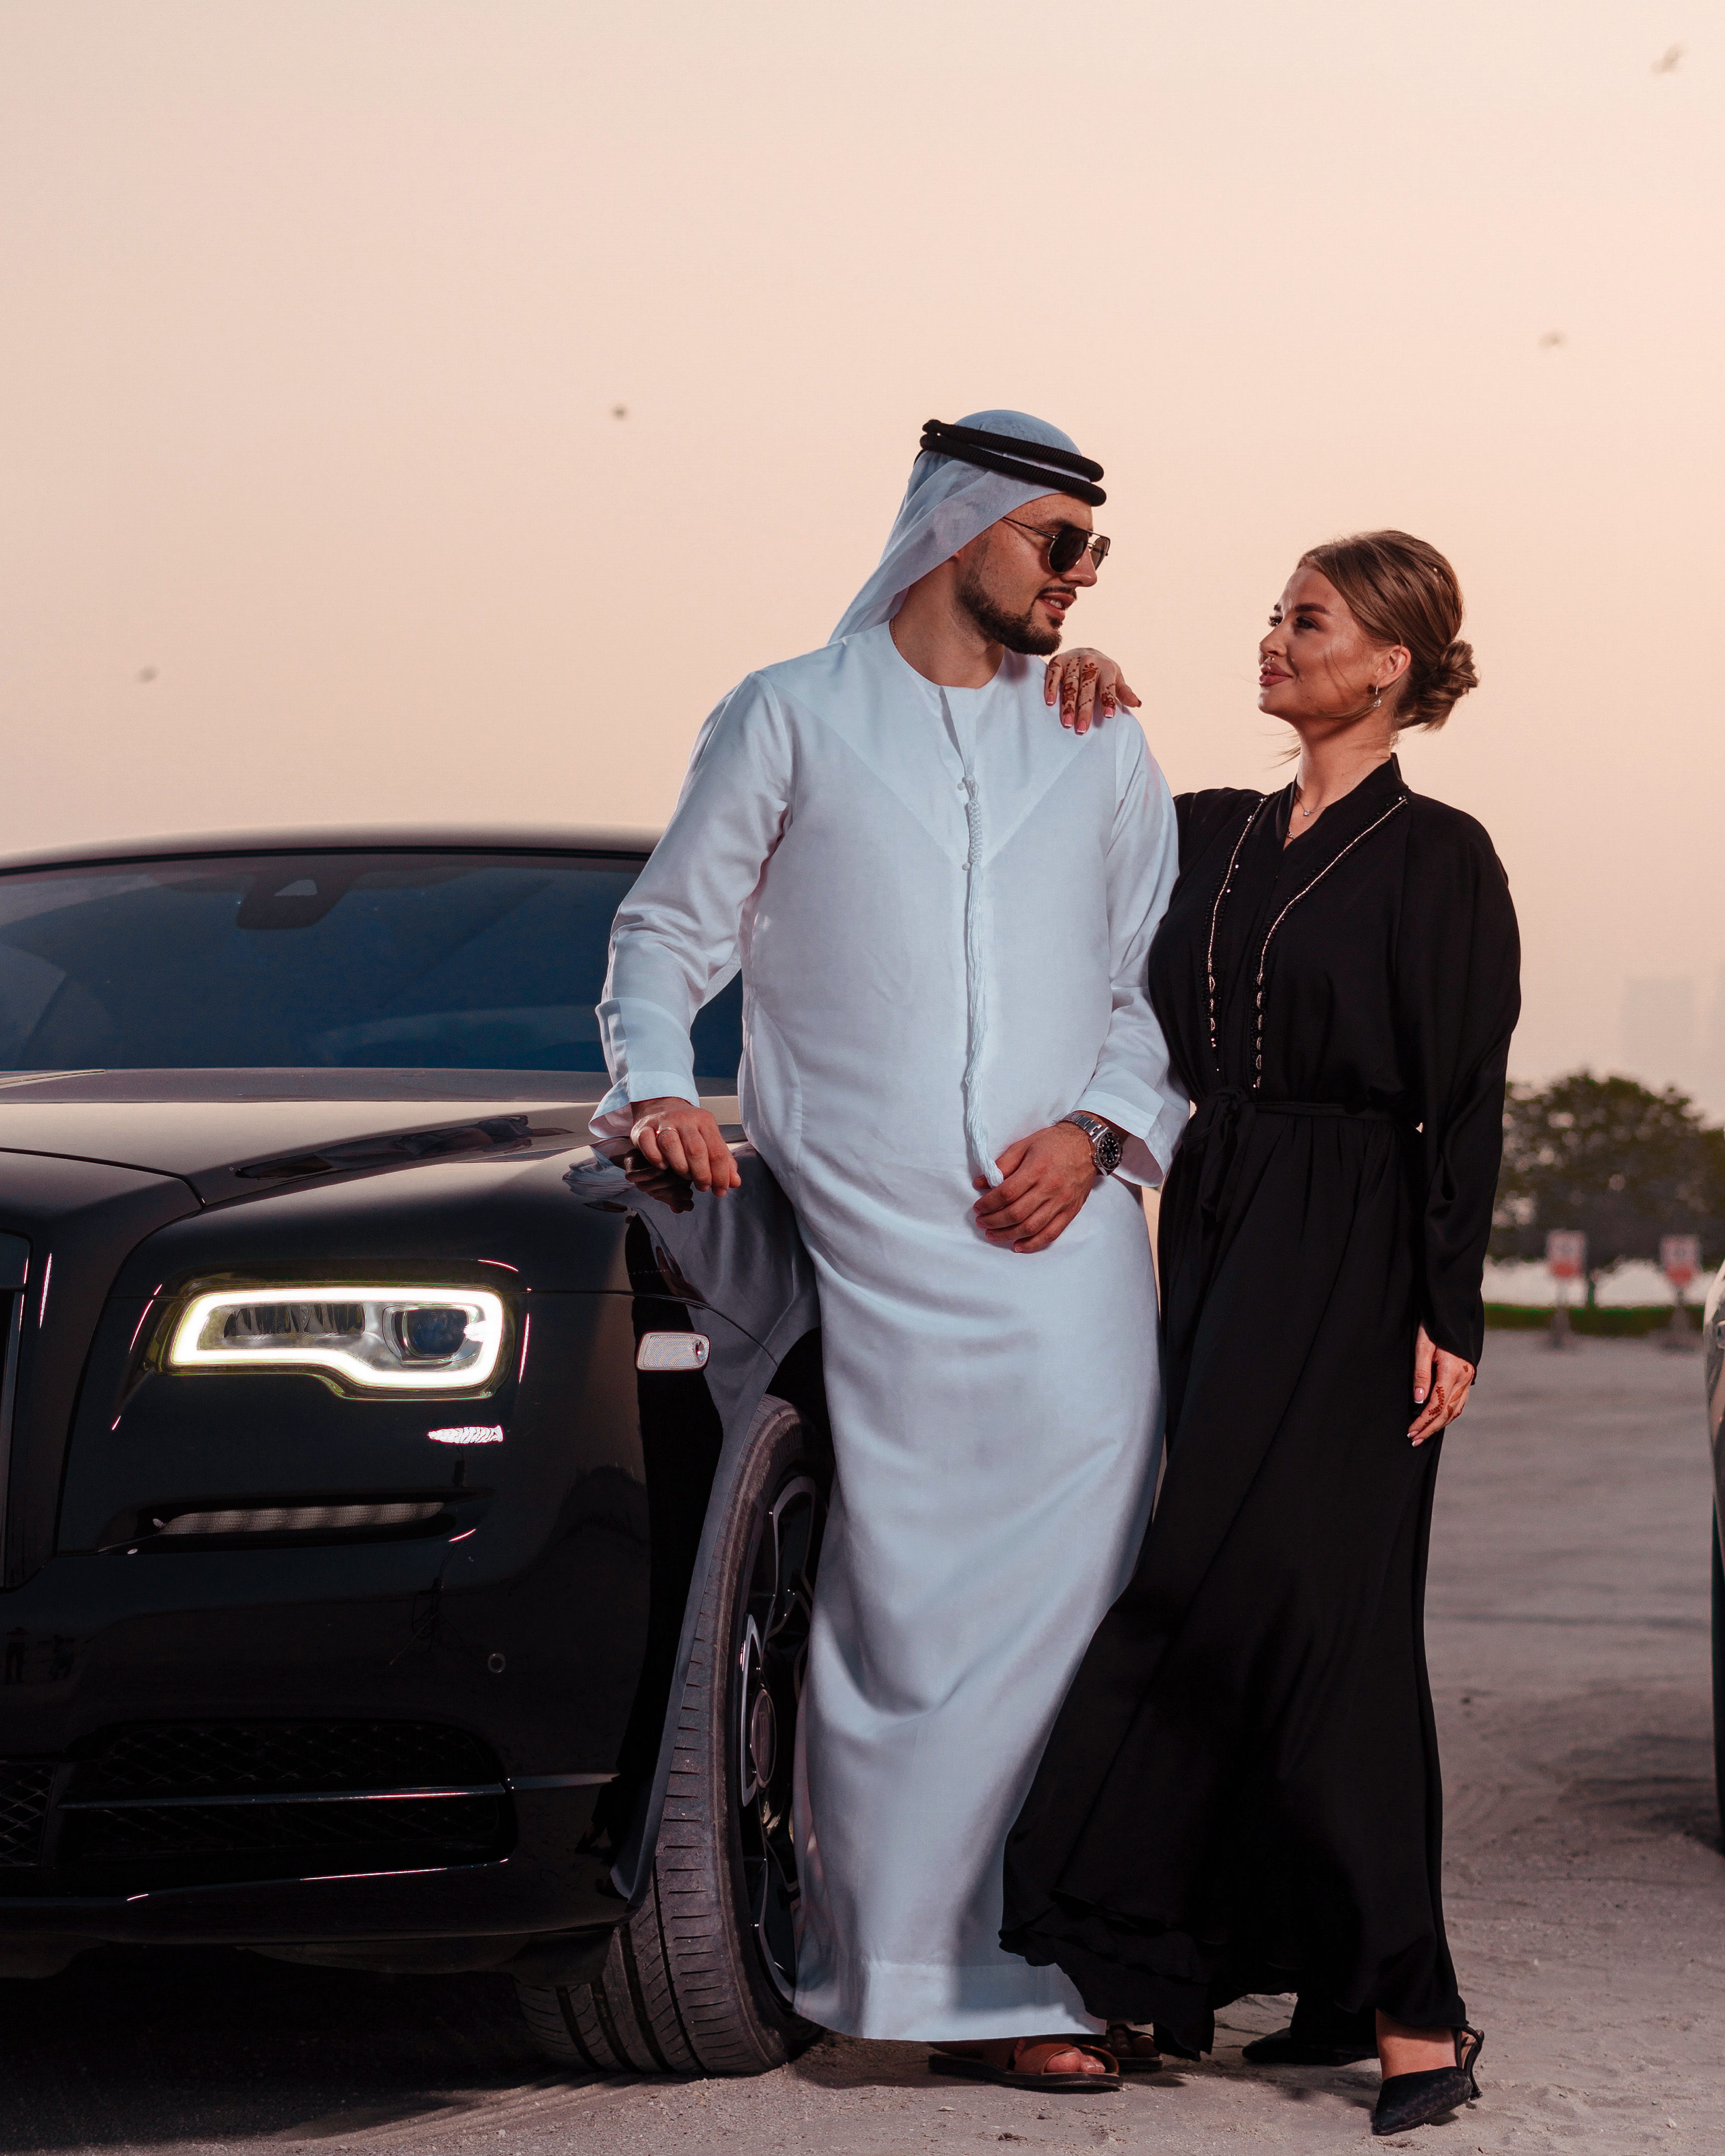 A man and woman posing during a luxury car photoshoot next to a Rolls Royce in Dubai.